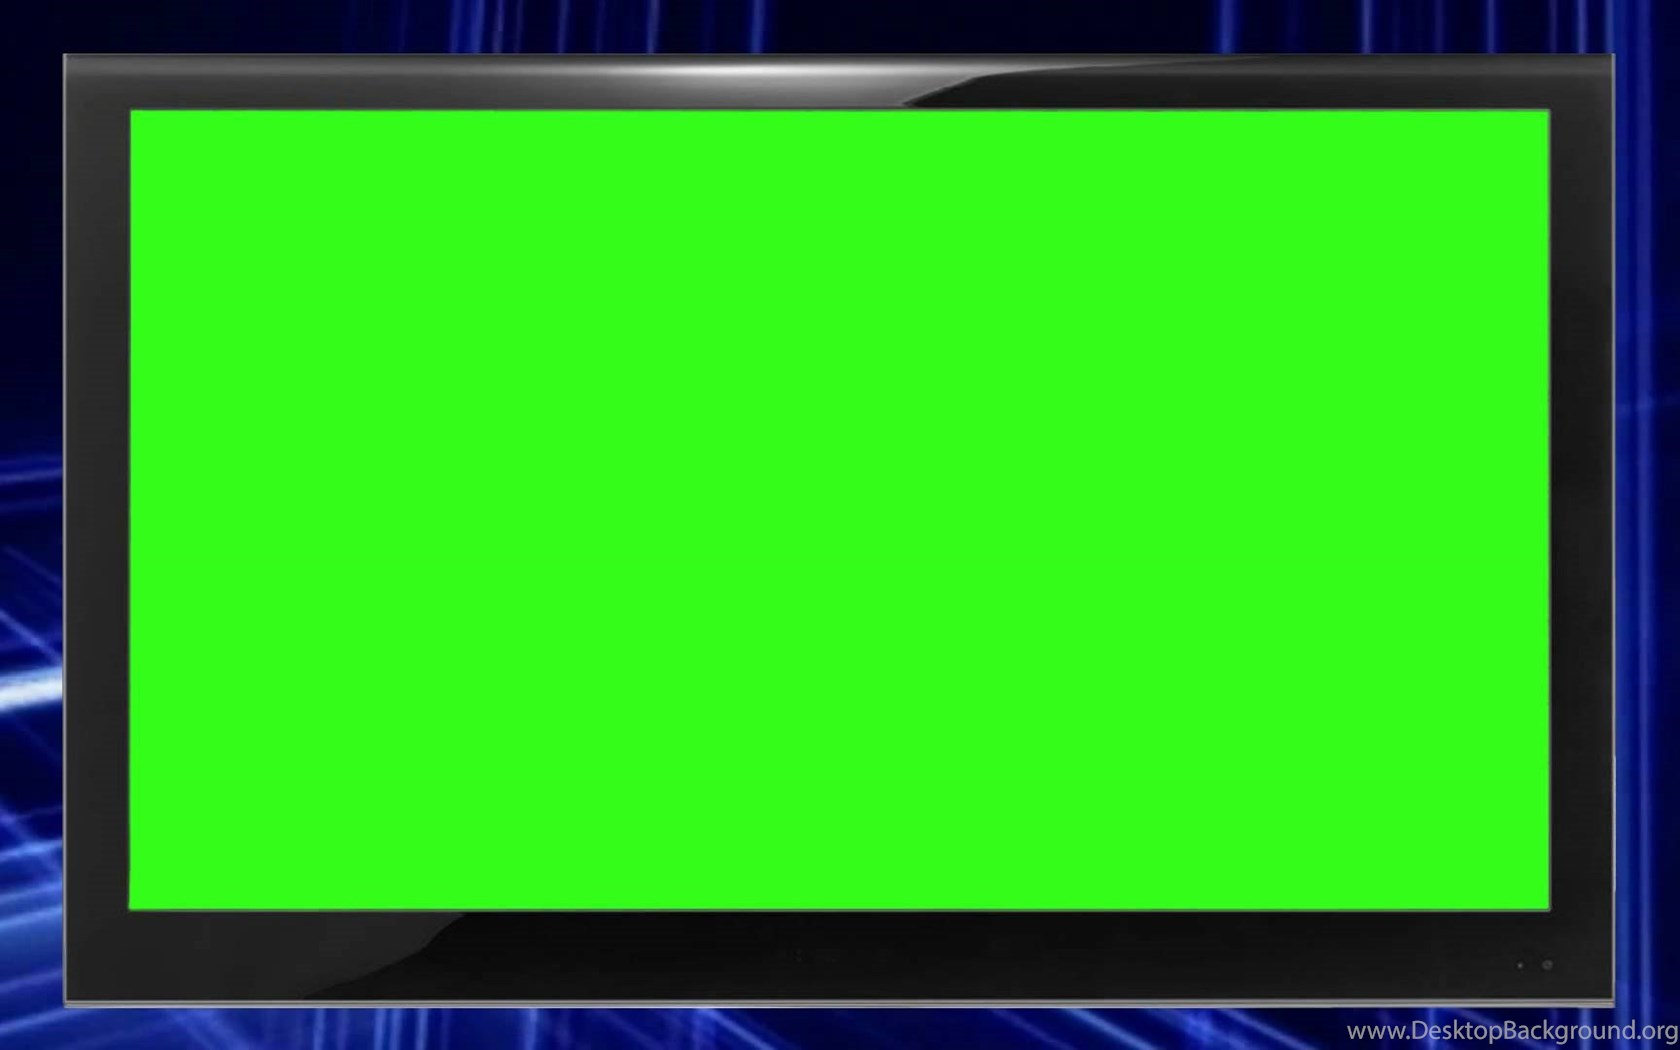  Green  Screen  Monitor Free Backgrounds  Video  1080p HD Stock 